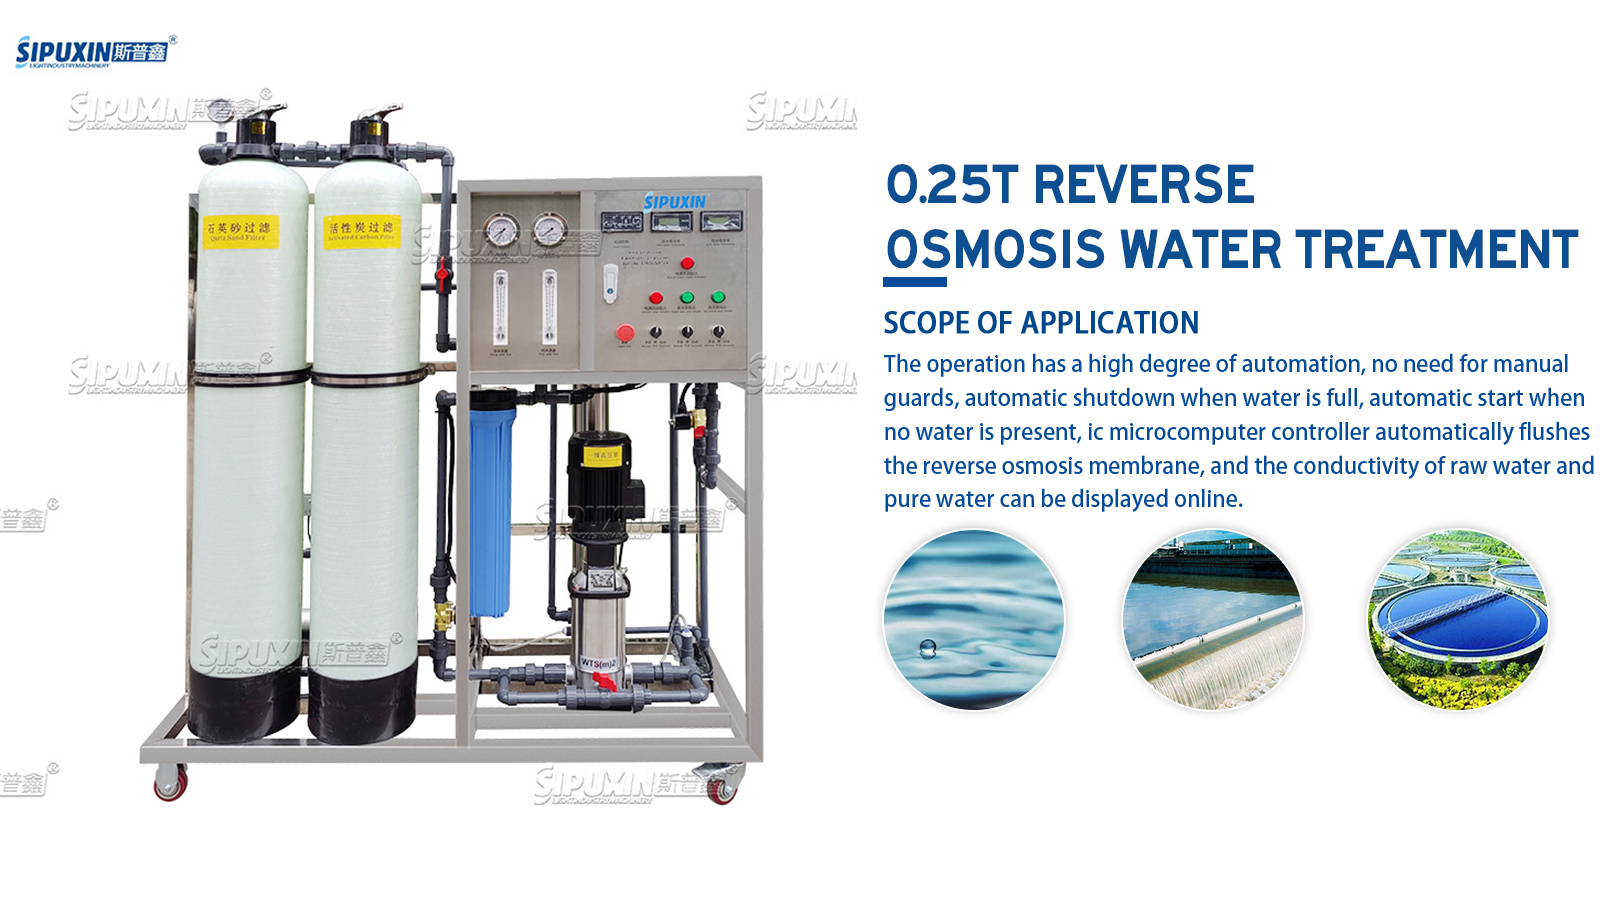 Sipuxin 0.25T Reverse Osmosis Ballast Water Purification Treatment Machinery System